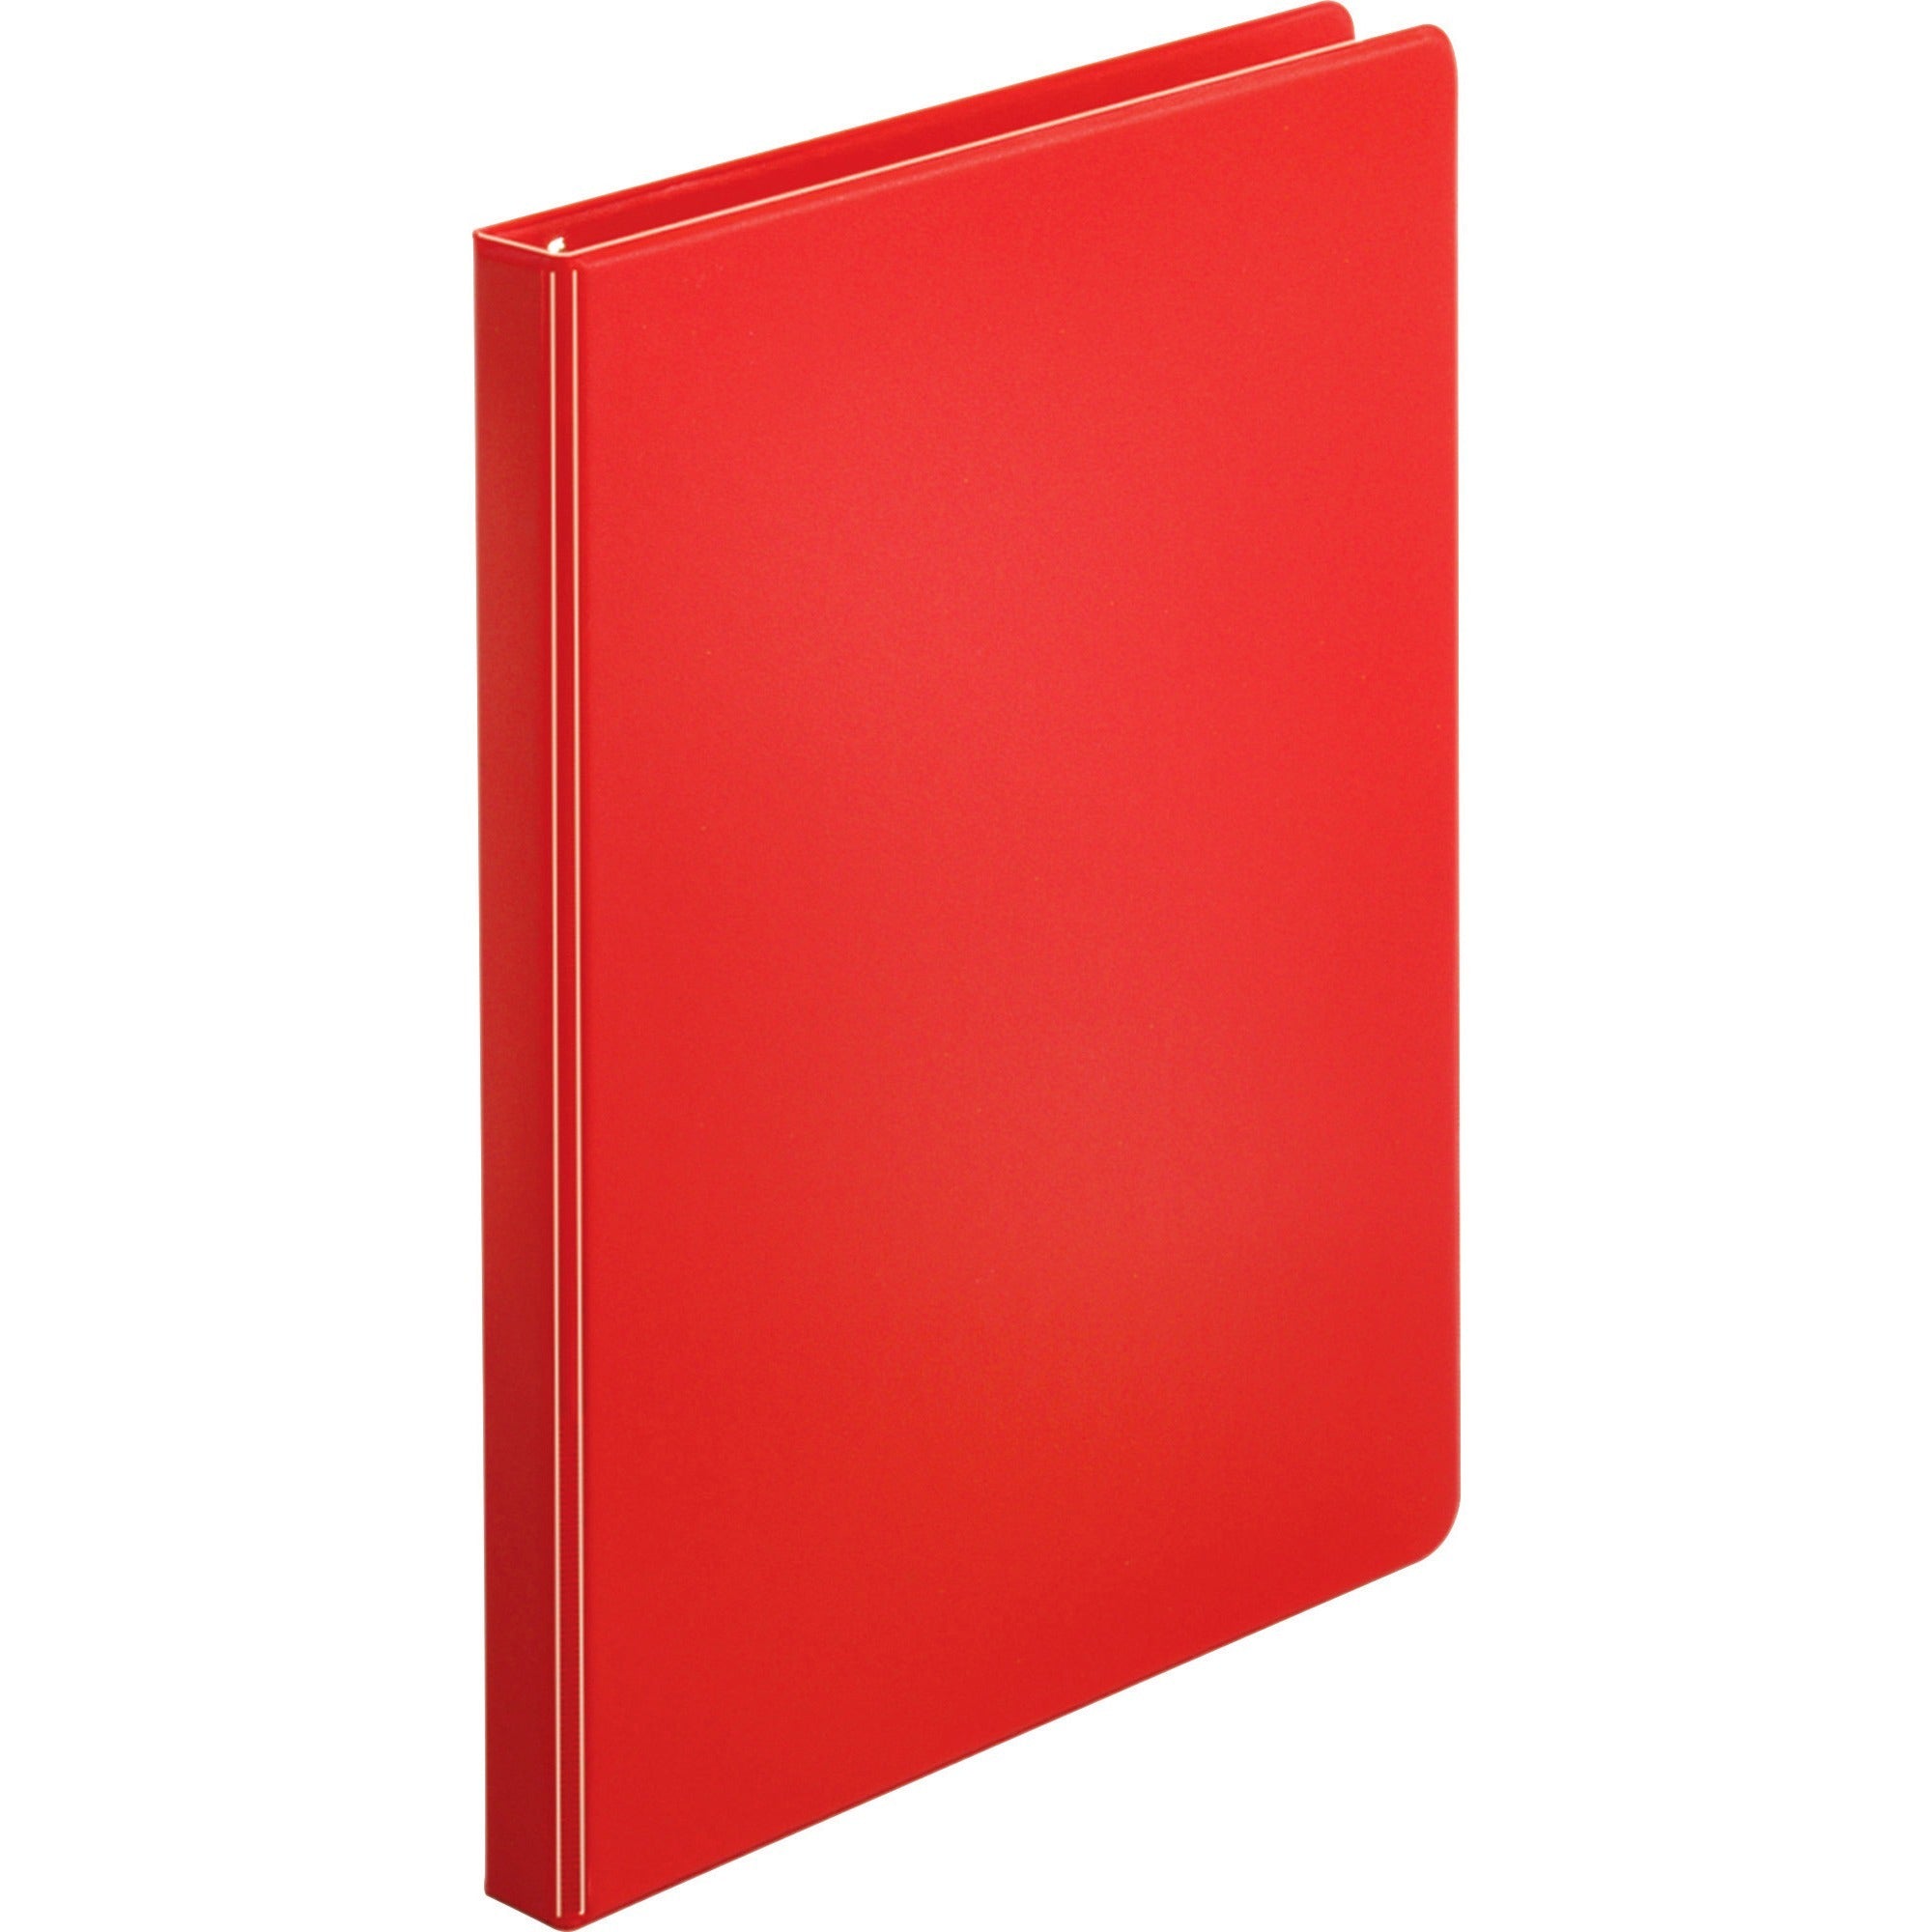 business-source-basic-round-ring-binders-1-2-binder-capacity-letter-8-1-2-x-11-sheet-size-125-sheet-capacity-3-x-round-ring-fasteners-internal-pockets-chipboard-polypropylene-red-exposed-rivet-sturdy-4-bundle_bsn28527bd - 2